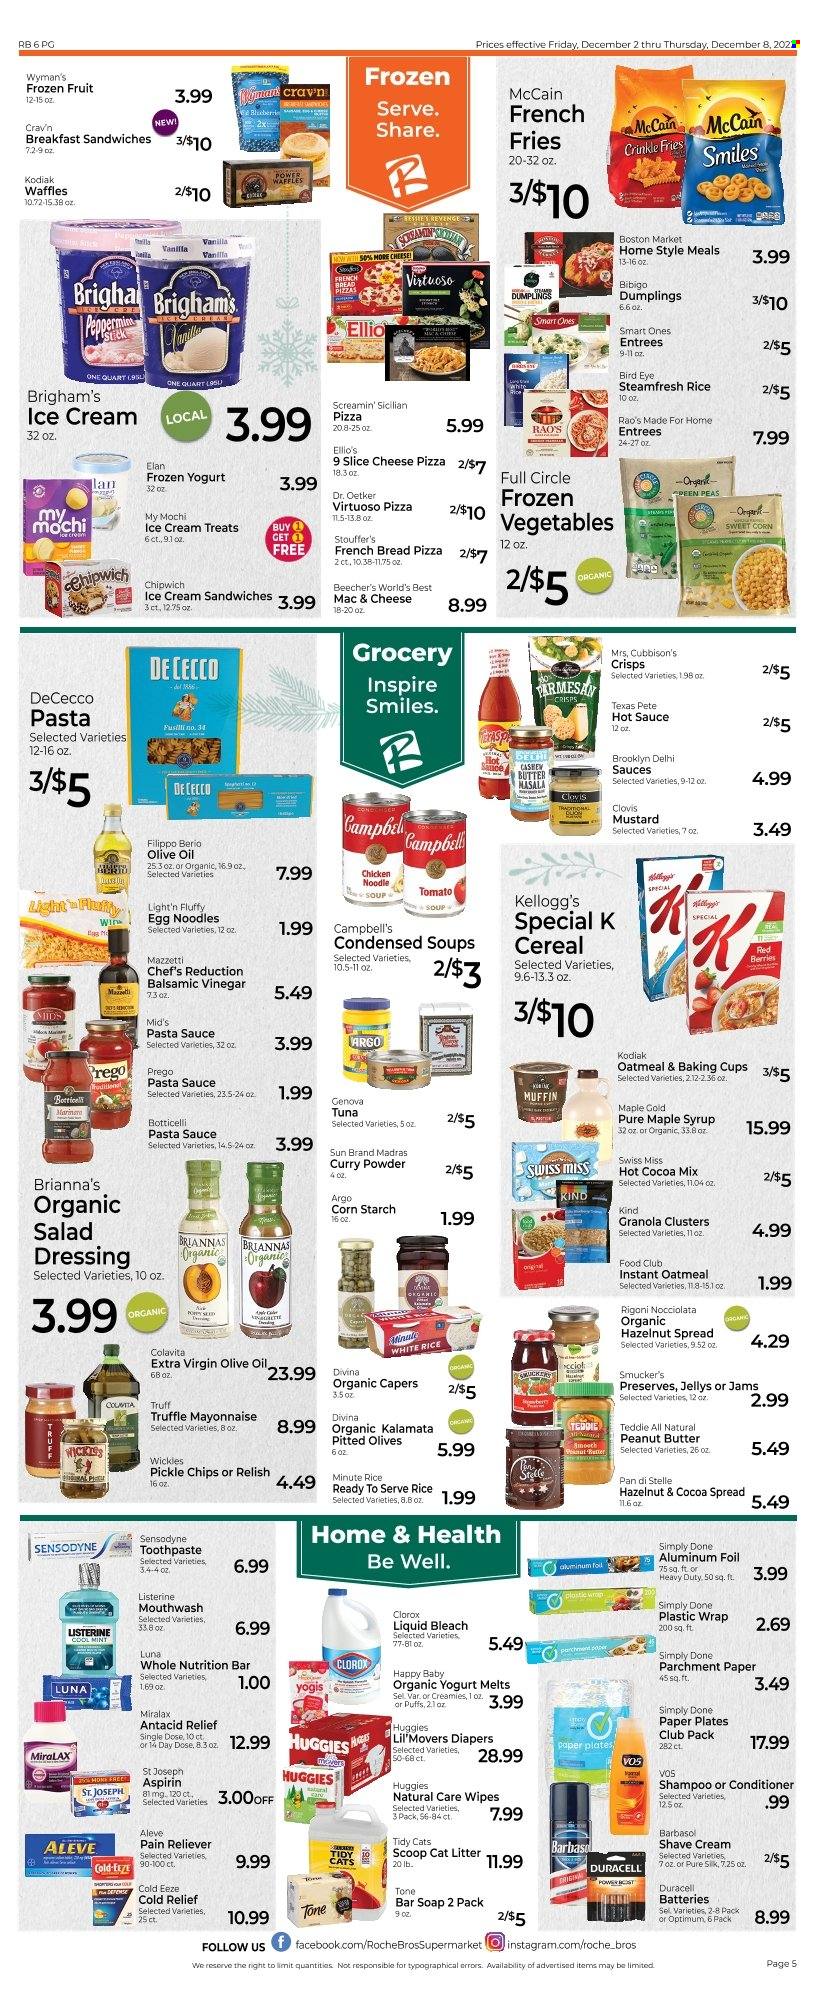 thumbnail - Roche Bros. Flyer - 12/02/2022 - 12/08/2022 - Sales products - bread, french bread, puffs, muffin, waffles, peas, tuna, Campbell's, pizza, pasta sauce, soup, dumplings, noodles cup, noodles, sliced cheese, parmesan, Dr. Oetker, yoghurt, organic yoghurt, Swiss Miss, mayonnaise, ice cream, ice cream sandwich, frozen vegetables, Stouffer's, McCain, potato fries, french fries, crinkle fries, Screamin' Sicilian, truffles, Kellogg's, oatmeal, capers, olives, cereals, granola, rice, egg noodles, white rice, curry powder, mustard, salad dressing, hot sauce, dressing, balsamic vinegar, extra virgin olive oil, olive oil, maple syrup, peanut butter, cashew cream, syrup, hazelnut spread, hot cocoa, beer, wipes, Huggies, nappies, bleach, Clorox, shampoo, soap bar, soap, Listerine, toothpaste, Sensodyne, mouthwash, conditioner, Barbasol, shave cream, battery, Duracell, cat litter, Optimum, Aleve, MiraLAX, Antacid, aspirin, Cold-EEZE. Page 6.